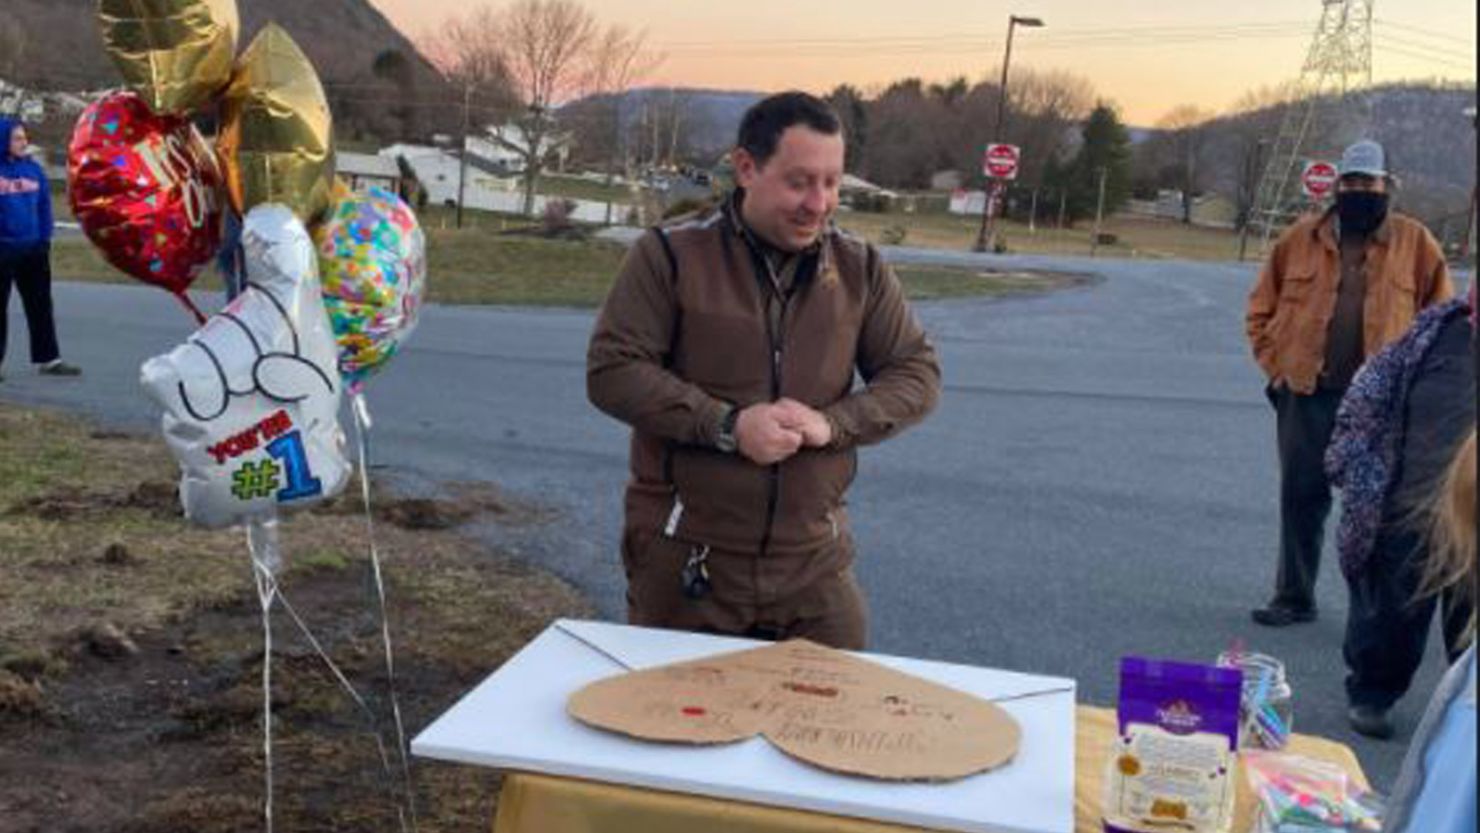 UPS driver Chad Turns was surprised by the residents of Dauphin, Pennsylvania, with a $1,000 gift thanking him for all his work during the Covid-19 pandemic. 